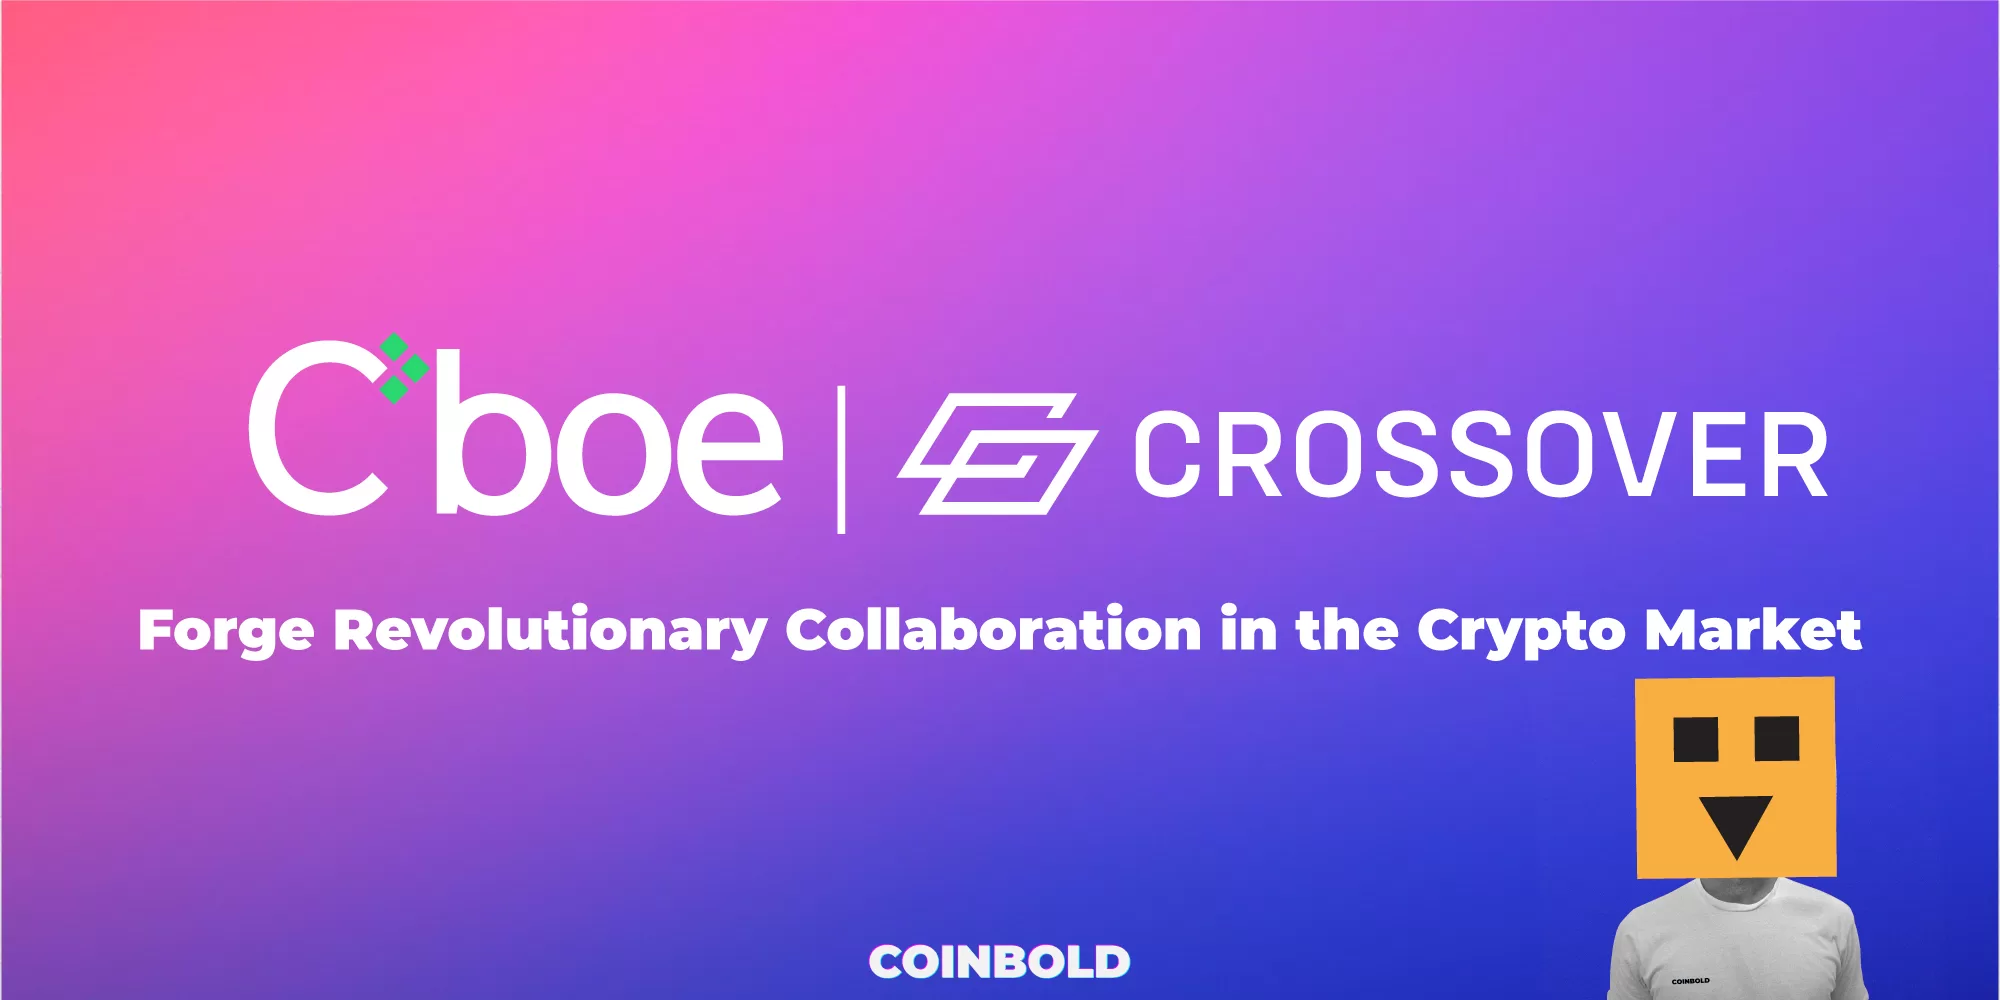 Crossover and Cboe Digital Forge Revolutionary Collaboration in the Crypto Market jpg